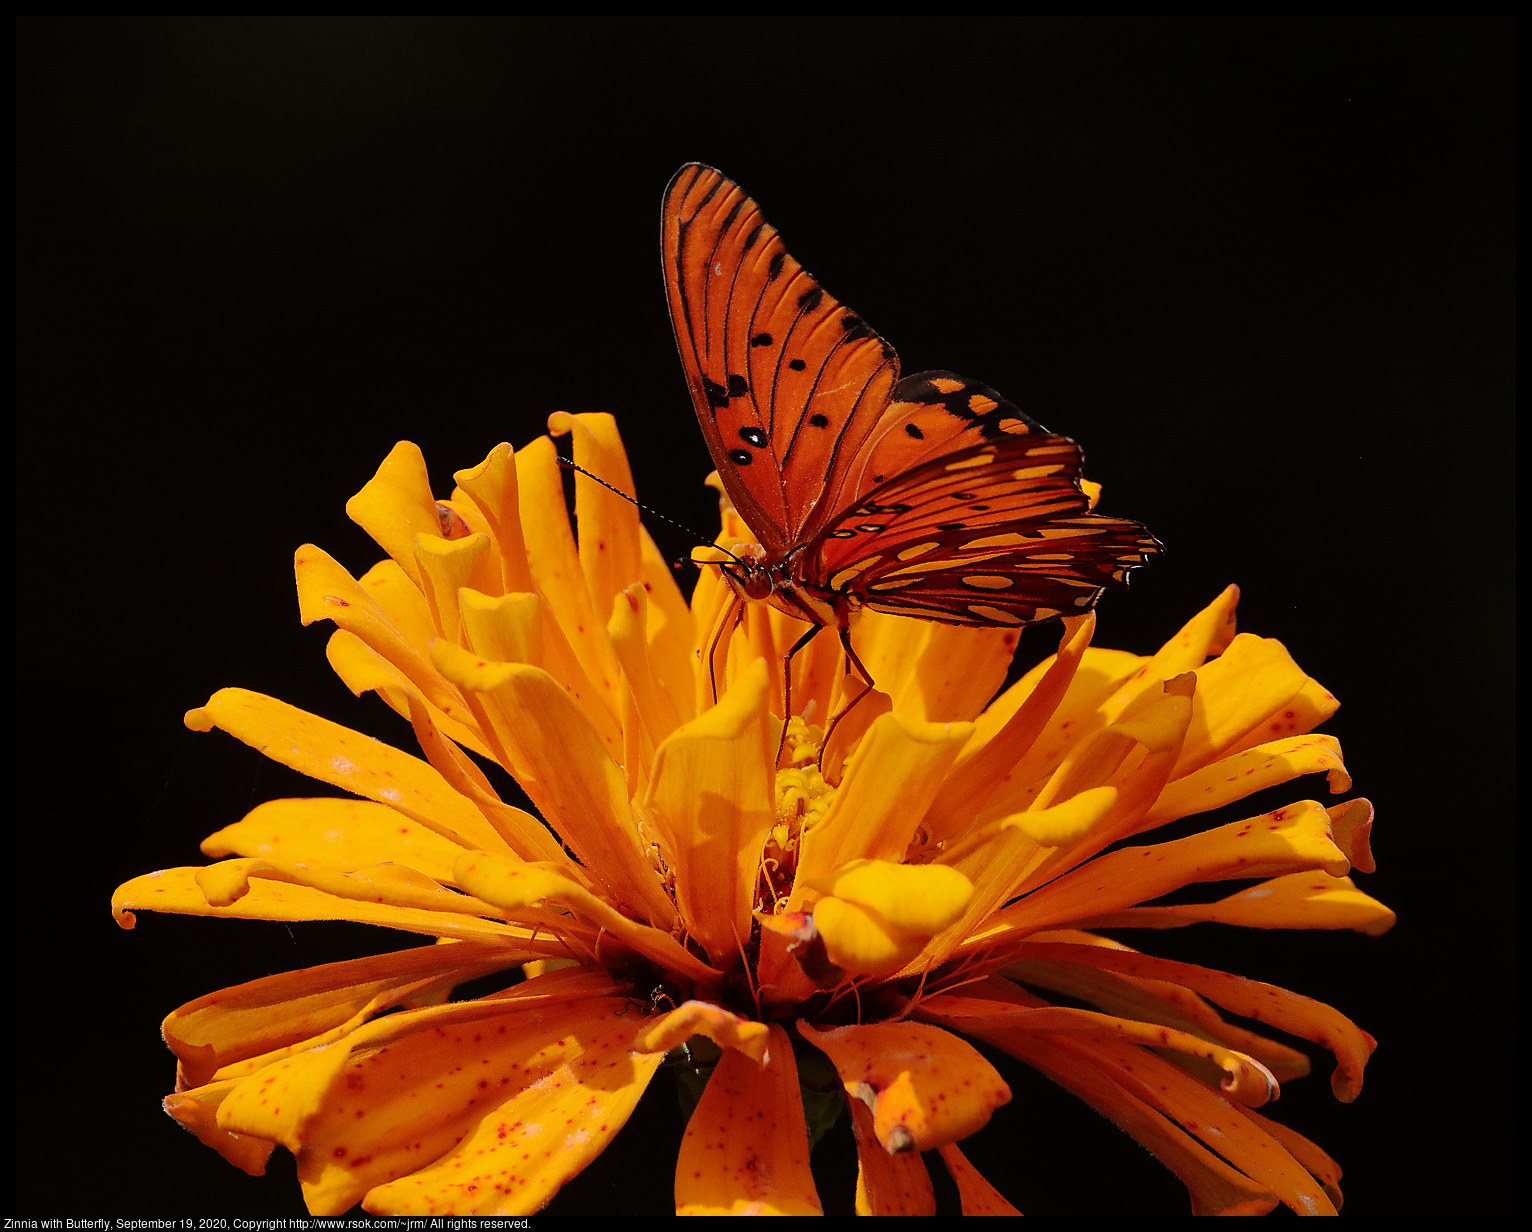 Zinnia with Butterfly, September 19, 2020